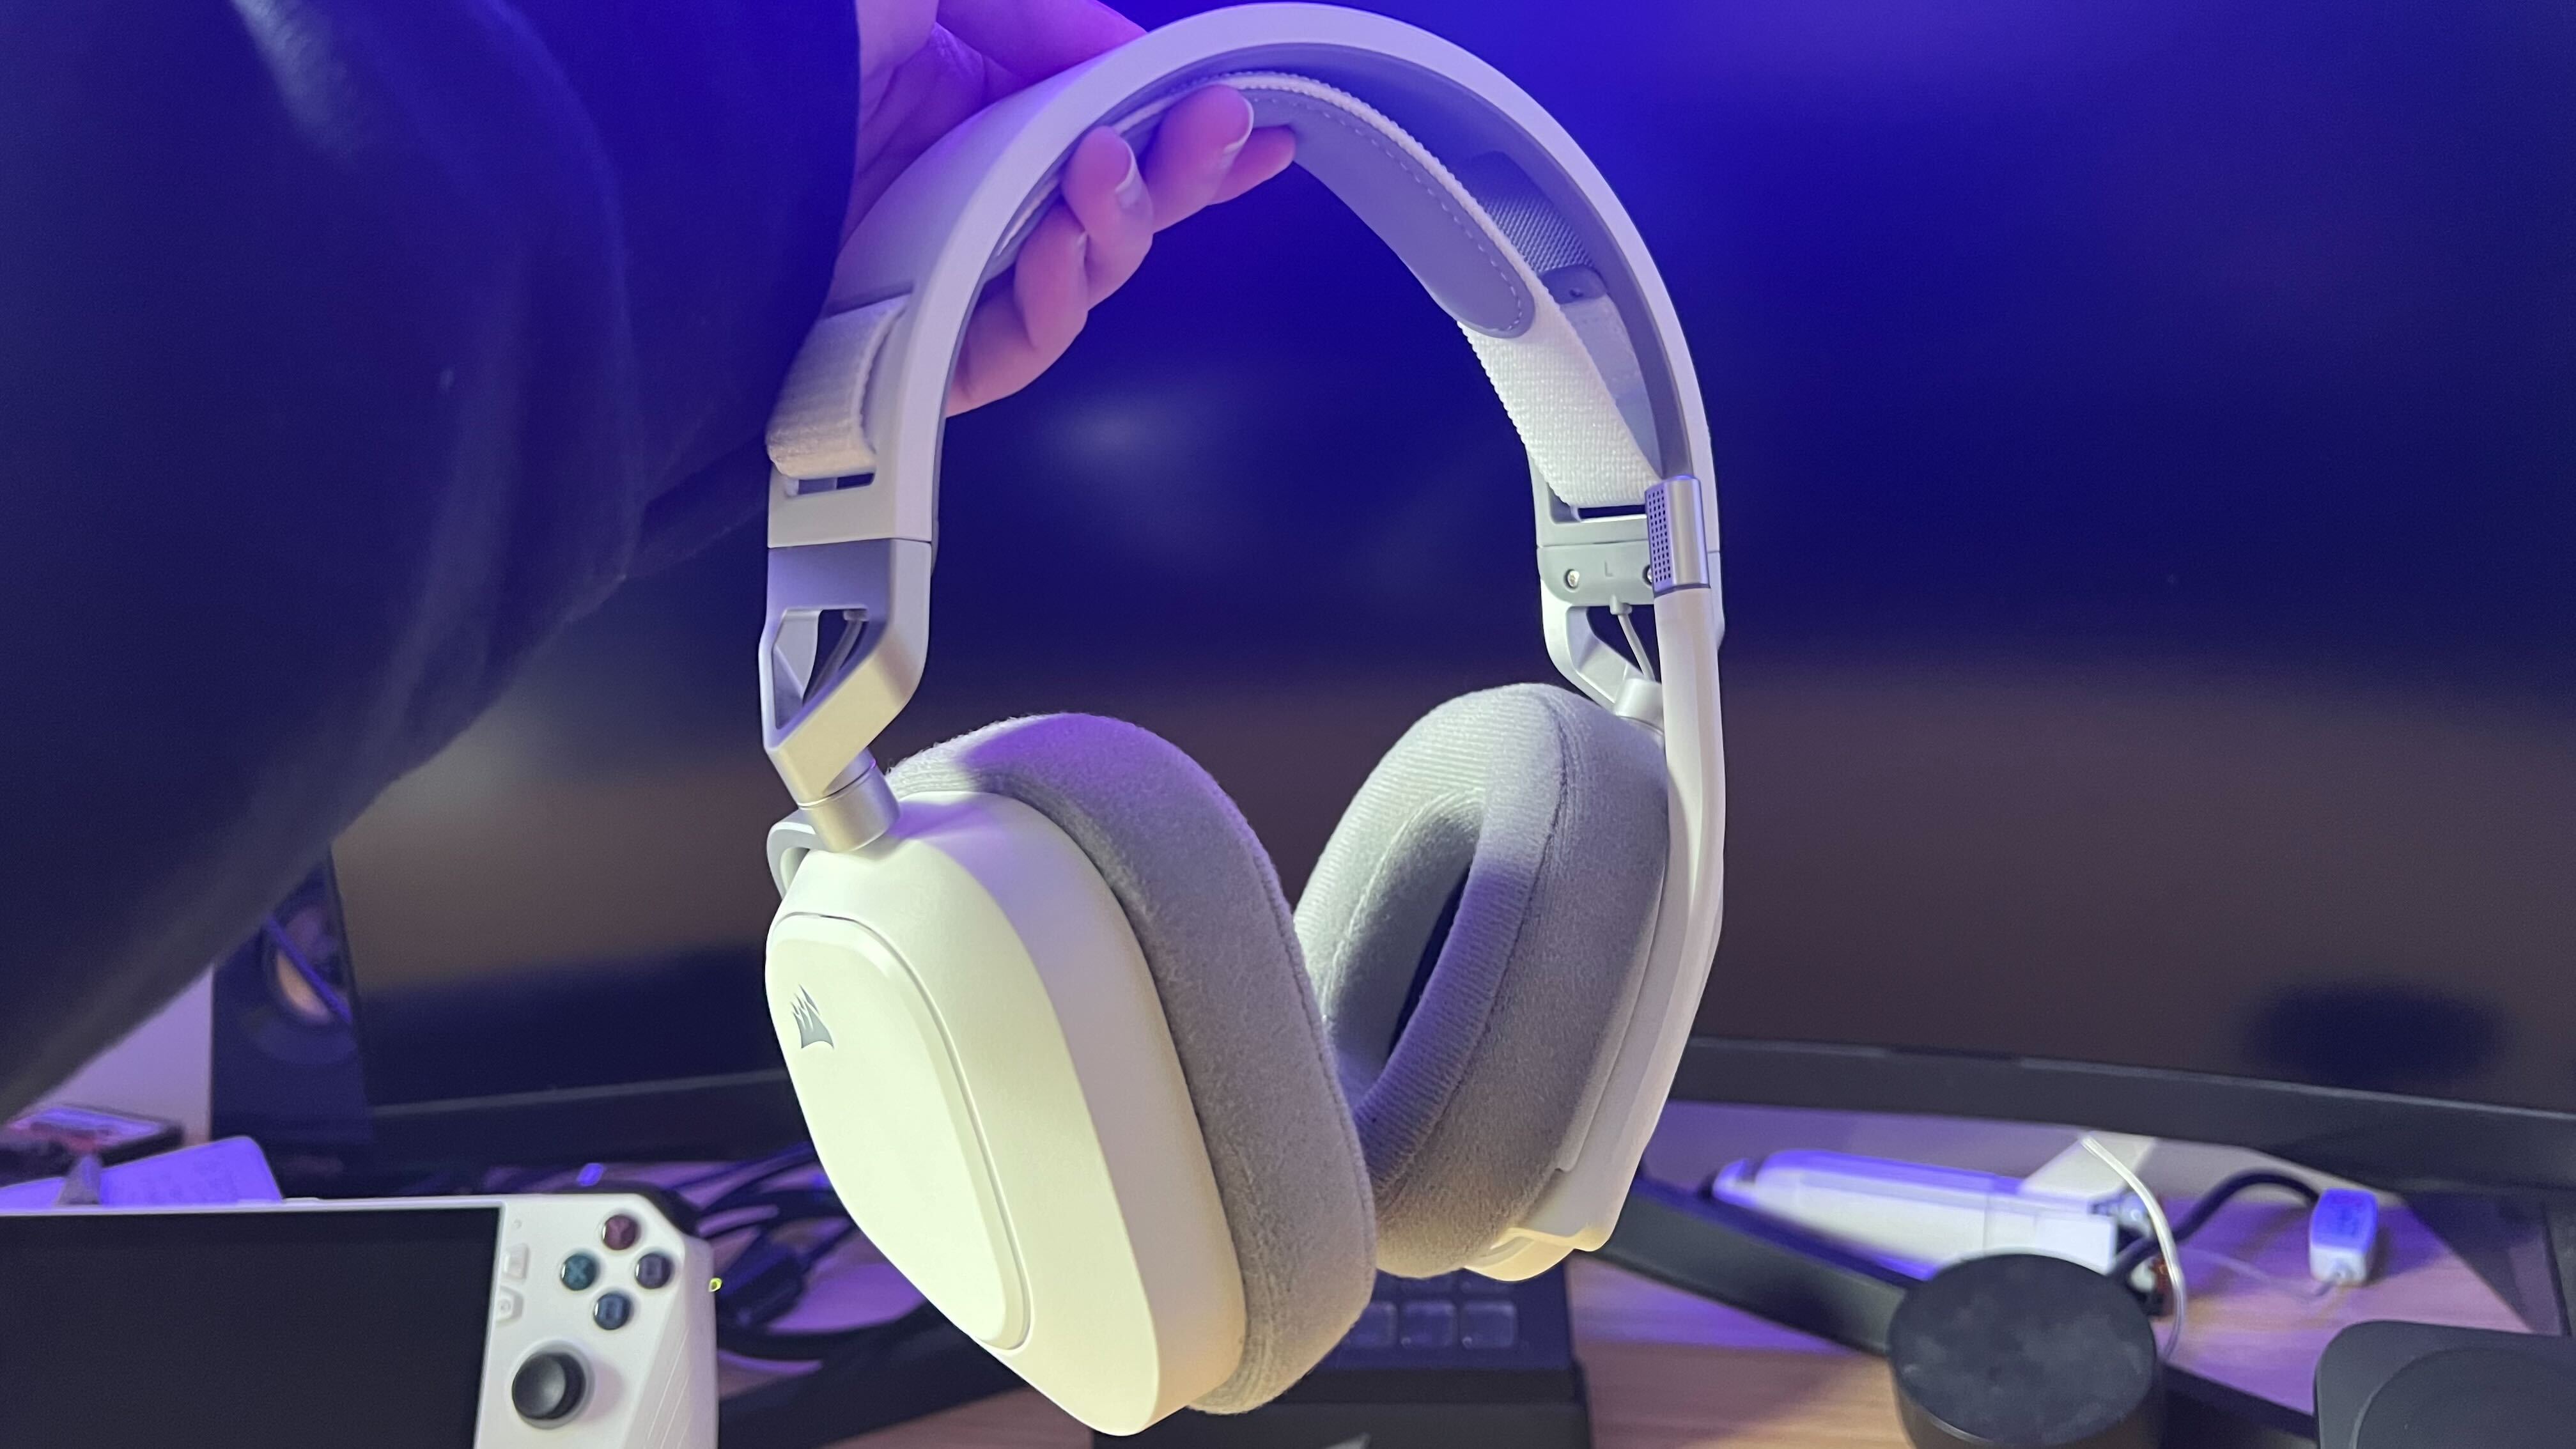 Corsair HS80 Max review: "does exactly what a mid-range headset should"